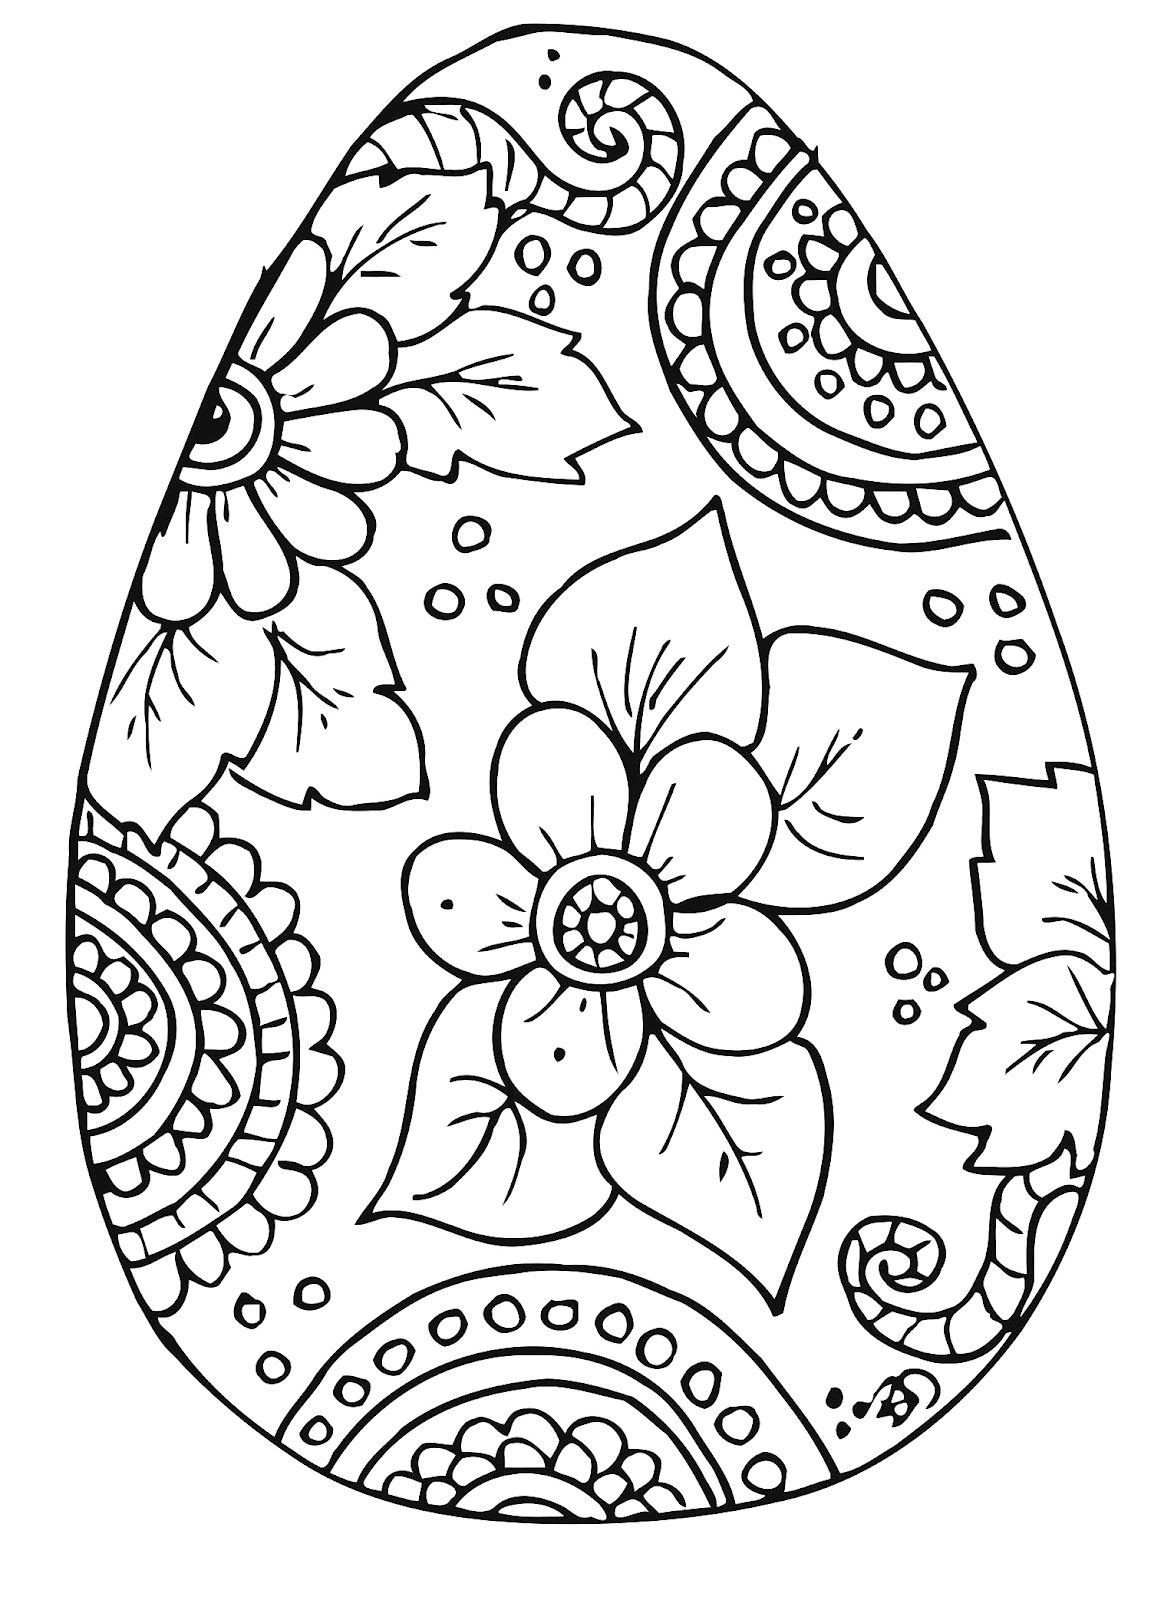 10 Cool Free Printable Easter Coloring Pages For Kids Who&amp;#039;ve Moved - Easter Egg Coloring Pages Free Printable